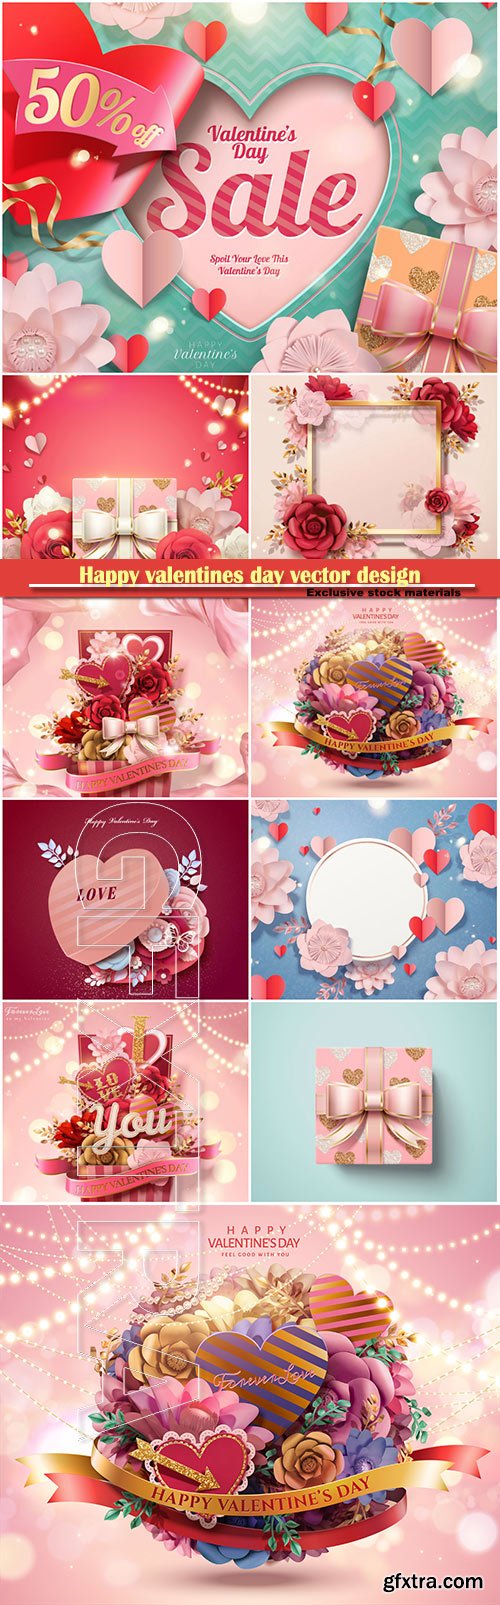 Happy valentines day vector design with heart, balloons, roses in 3d illustration # 10